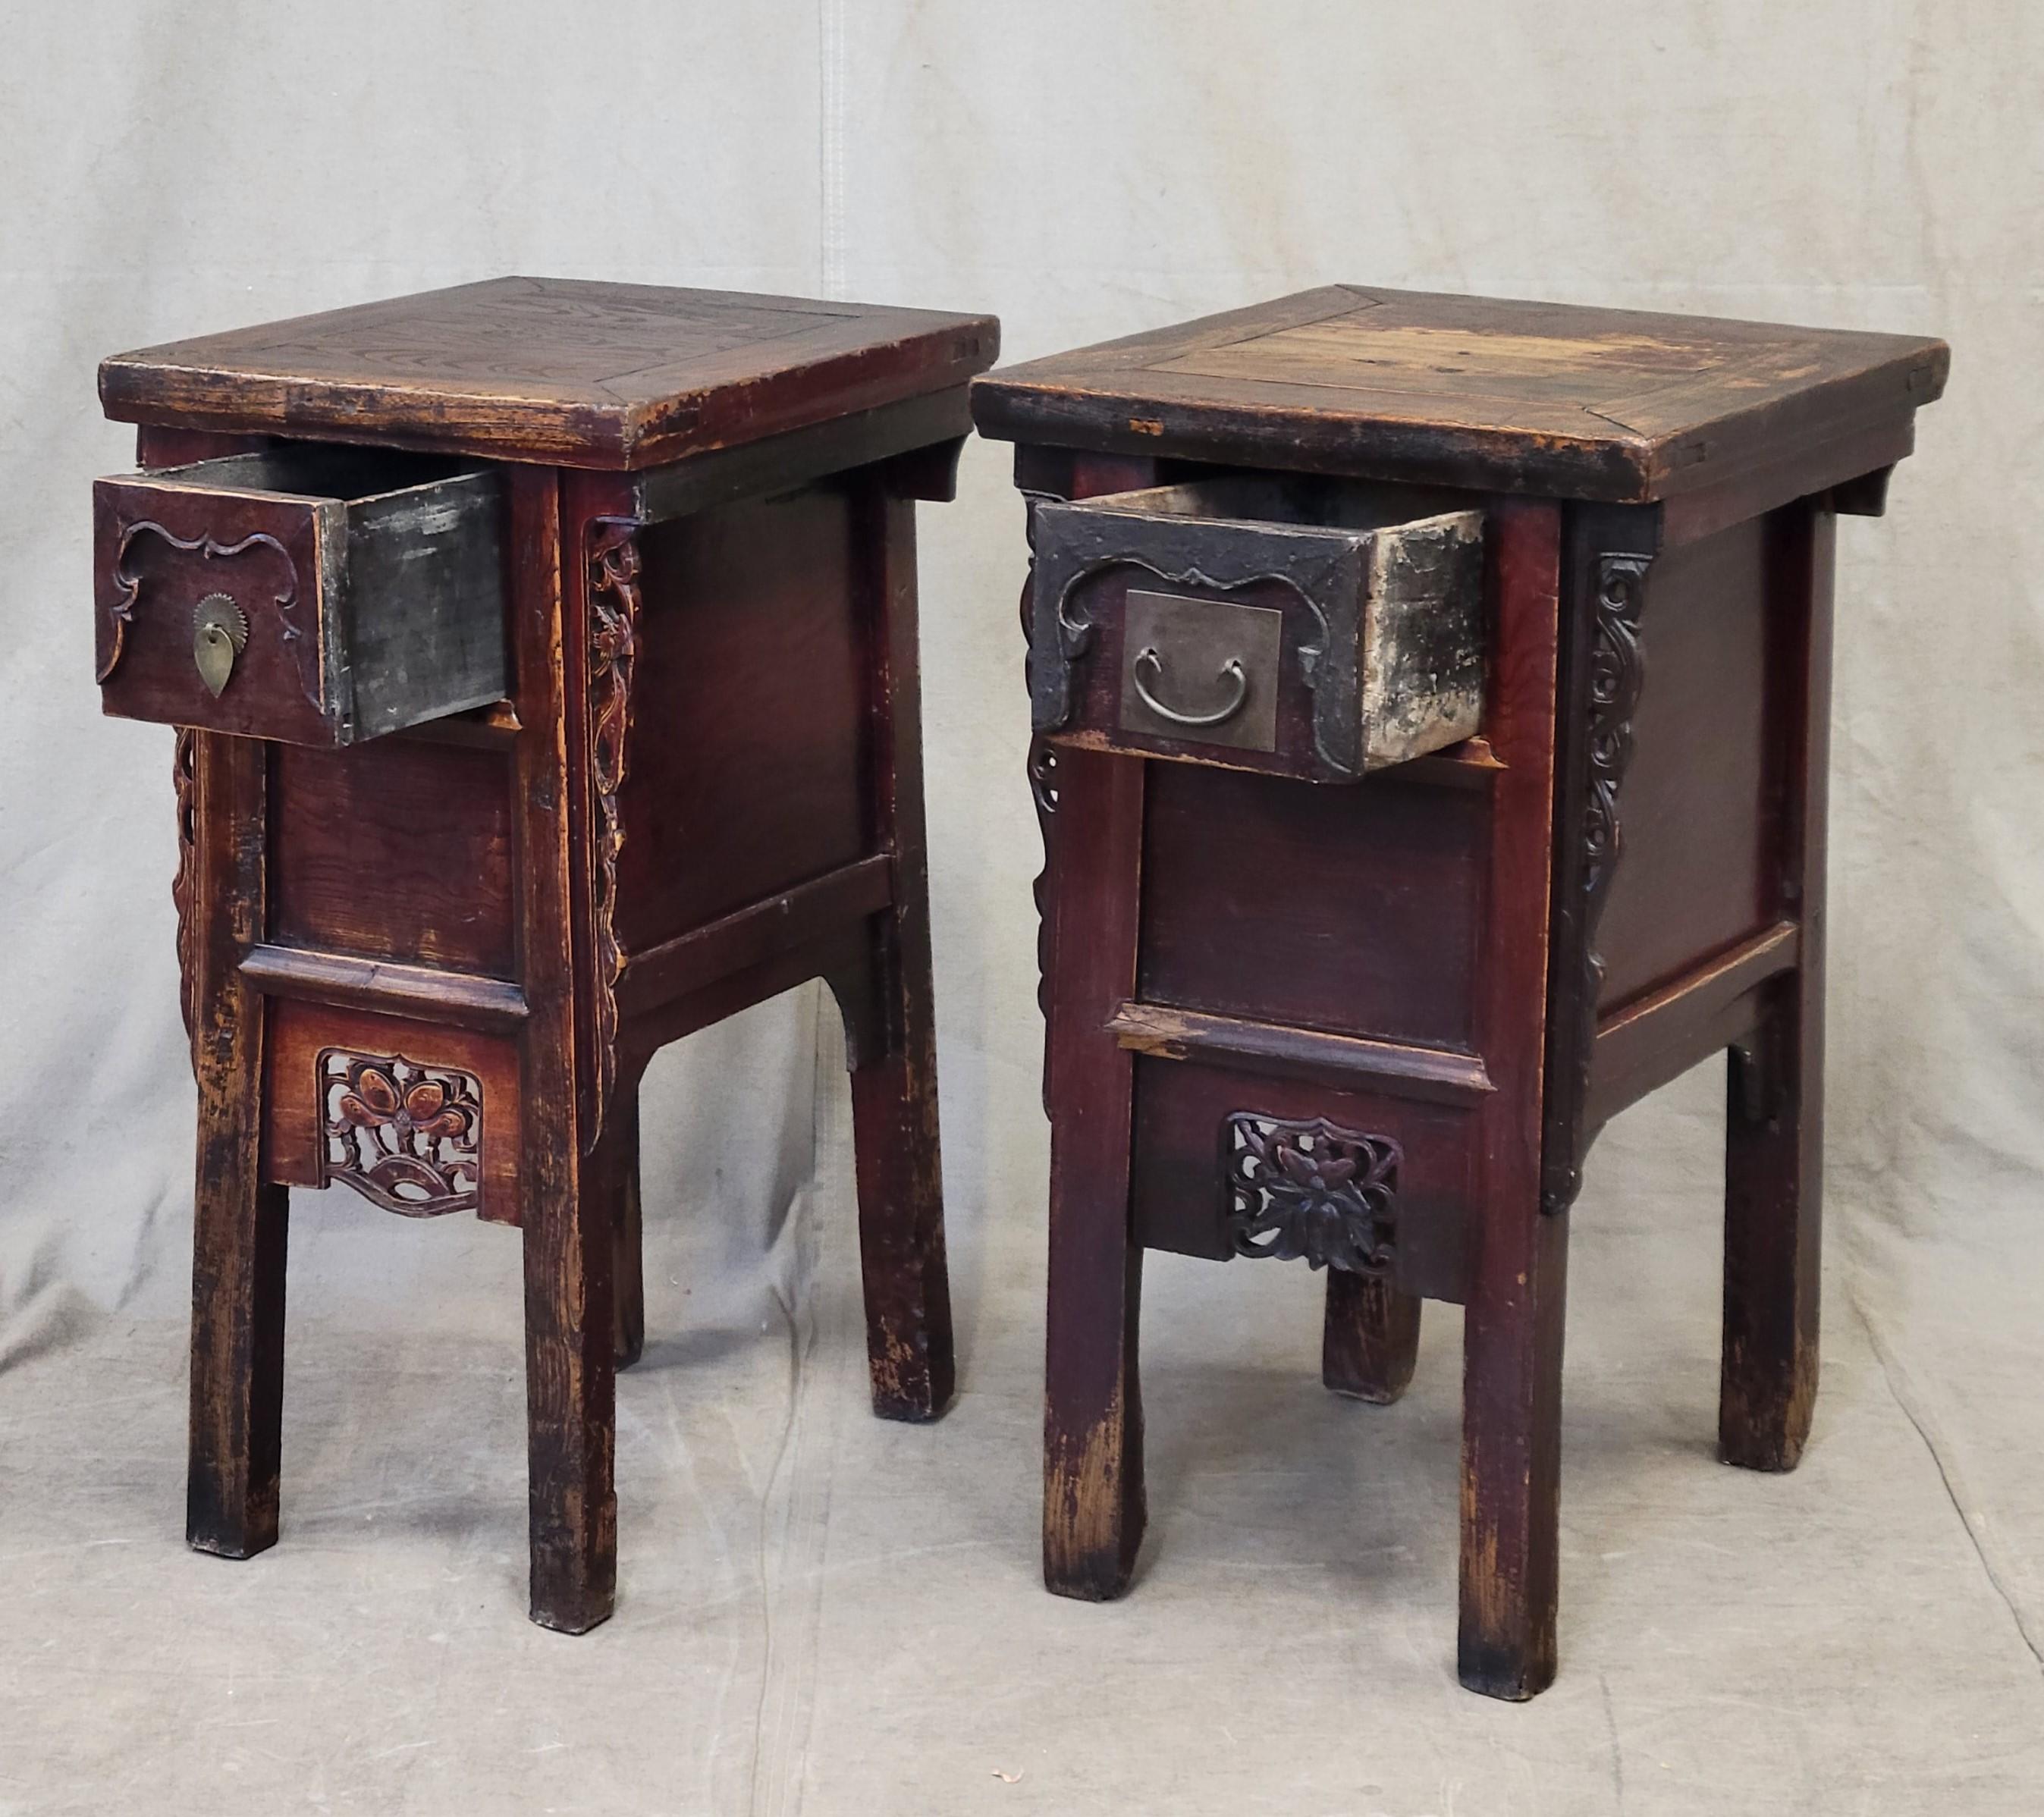 Chinese Chippendale Antique Chinese Elm Side Tables / Altar Tables - a Near Pair